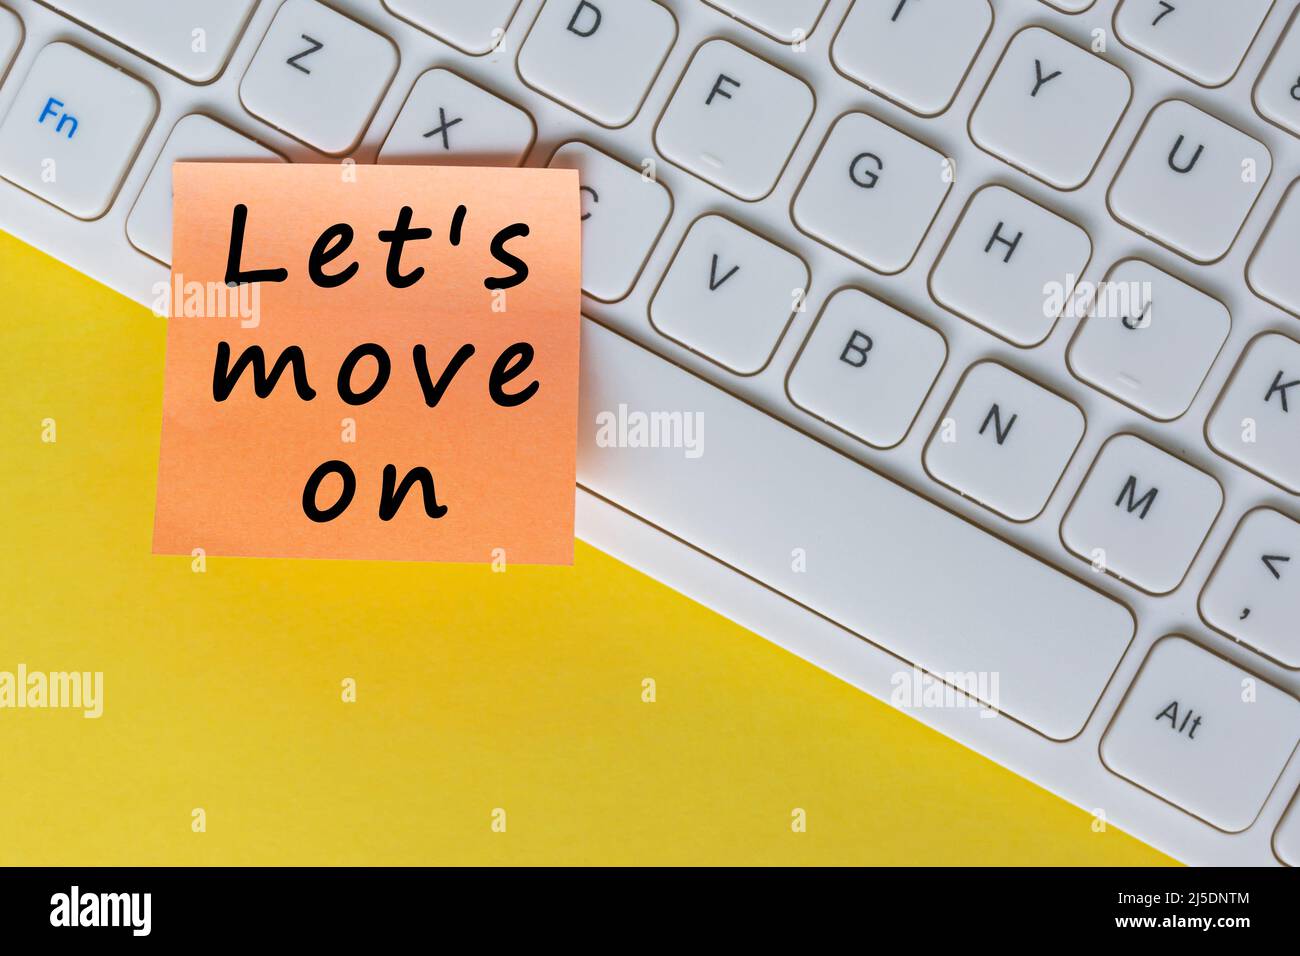 Let's move on text on orange sticky note on top of white keyboard. Stock Photo